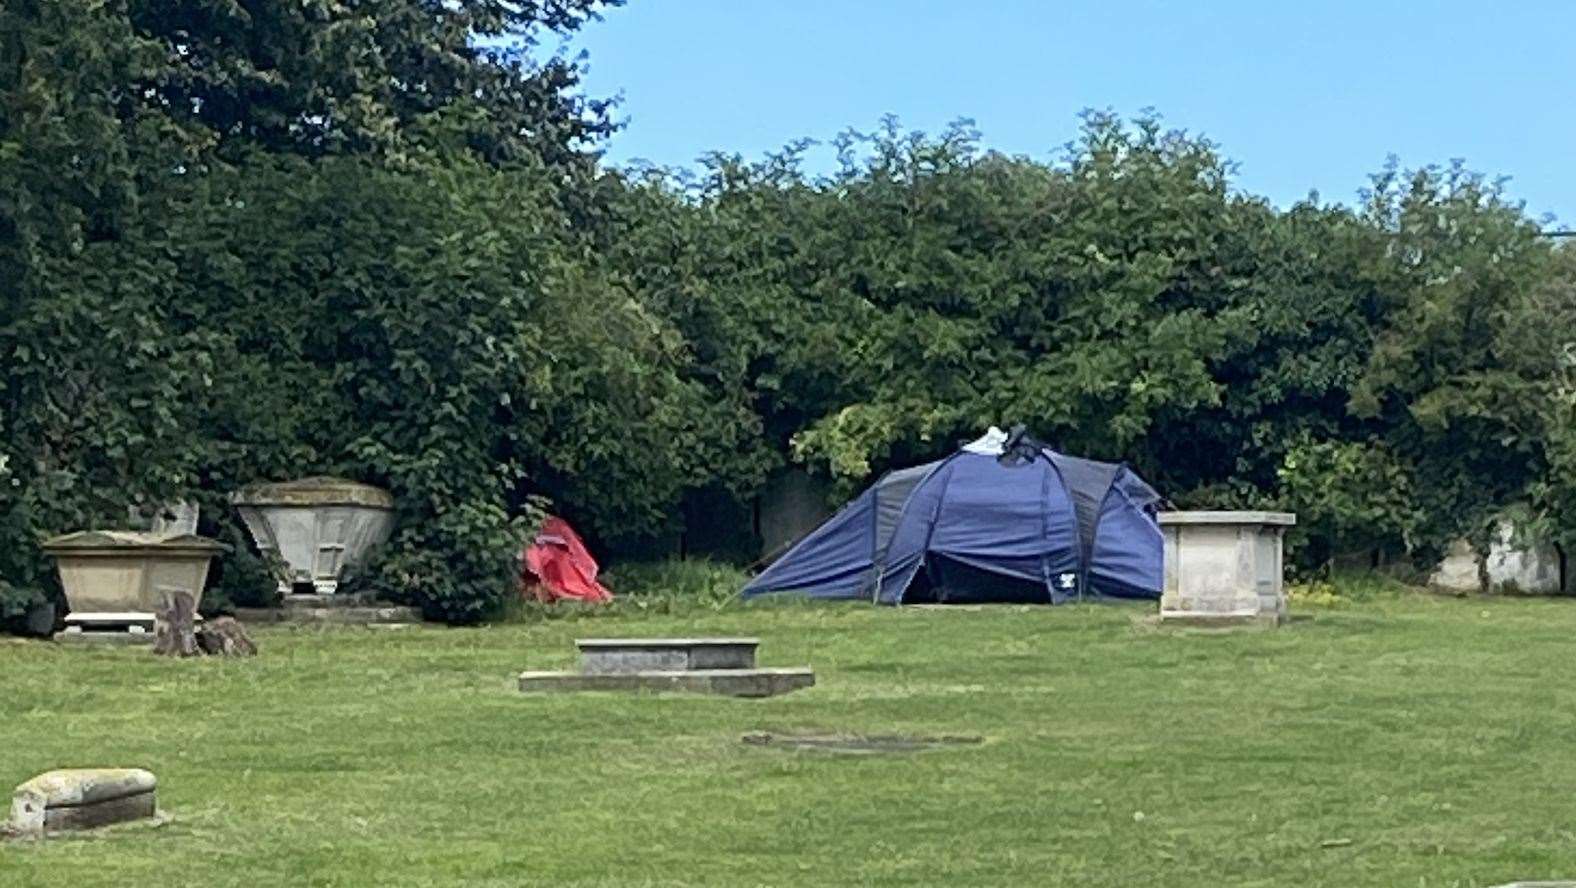 Tents often show up in the graveyard of St George's Church in Ramsgate during summers